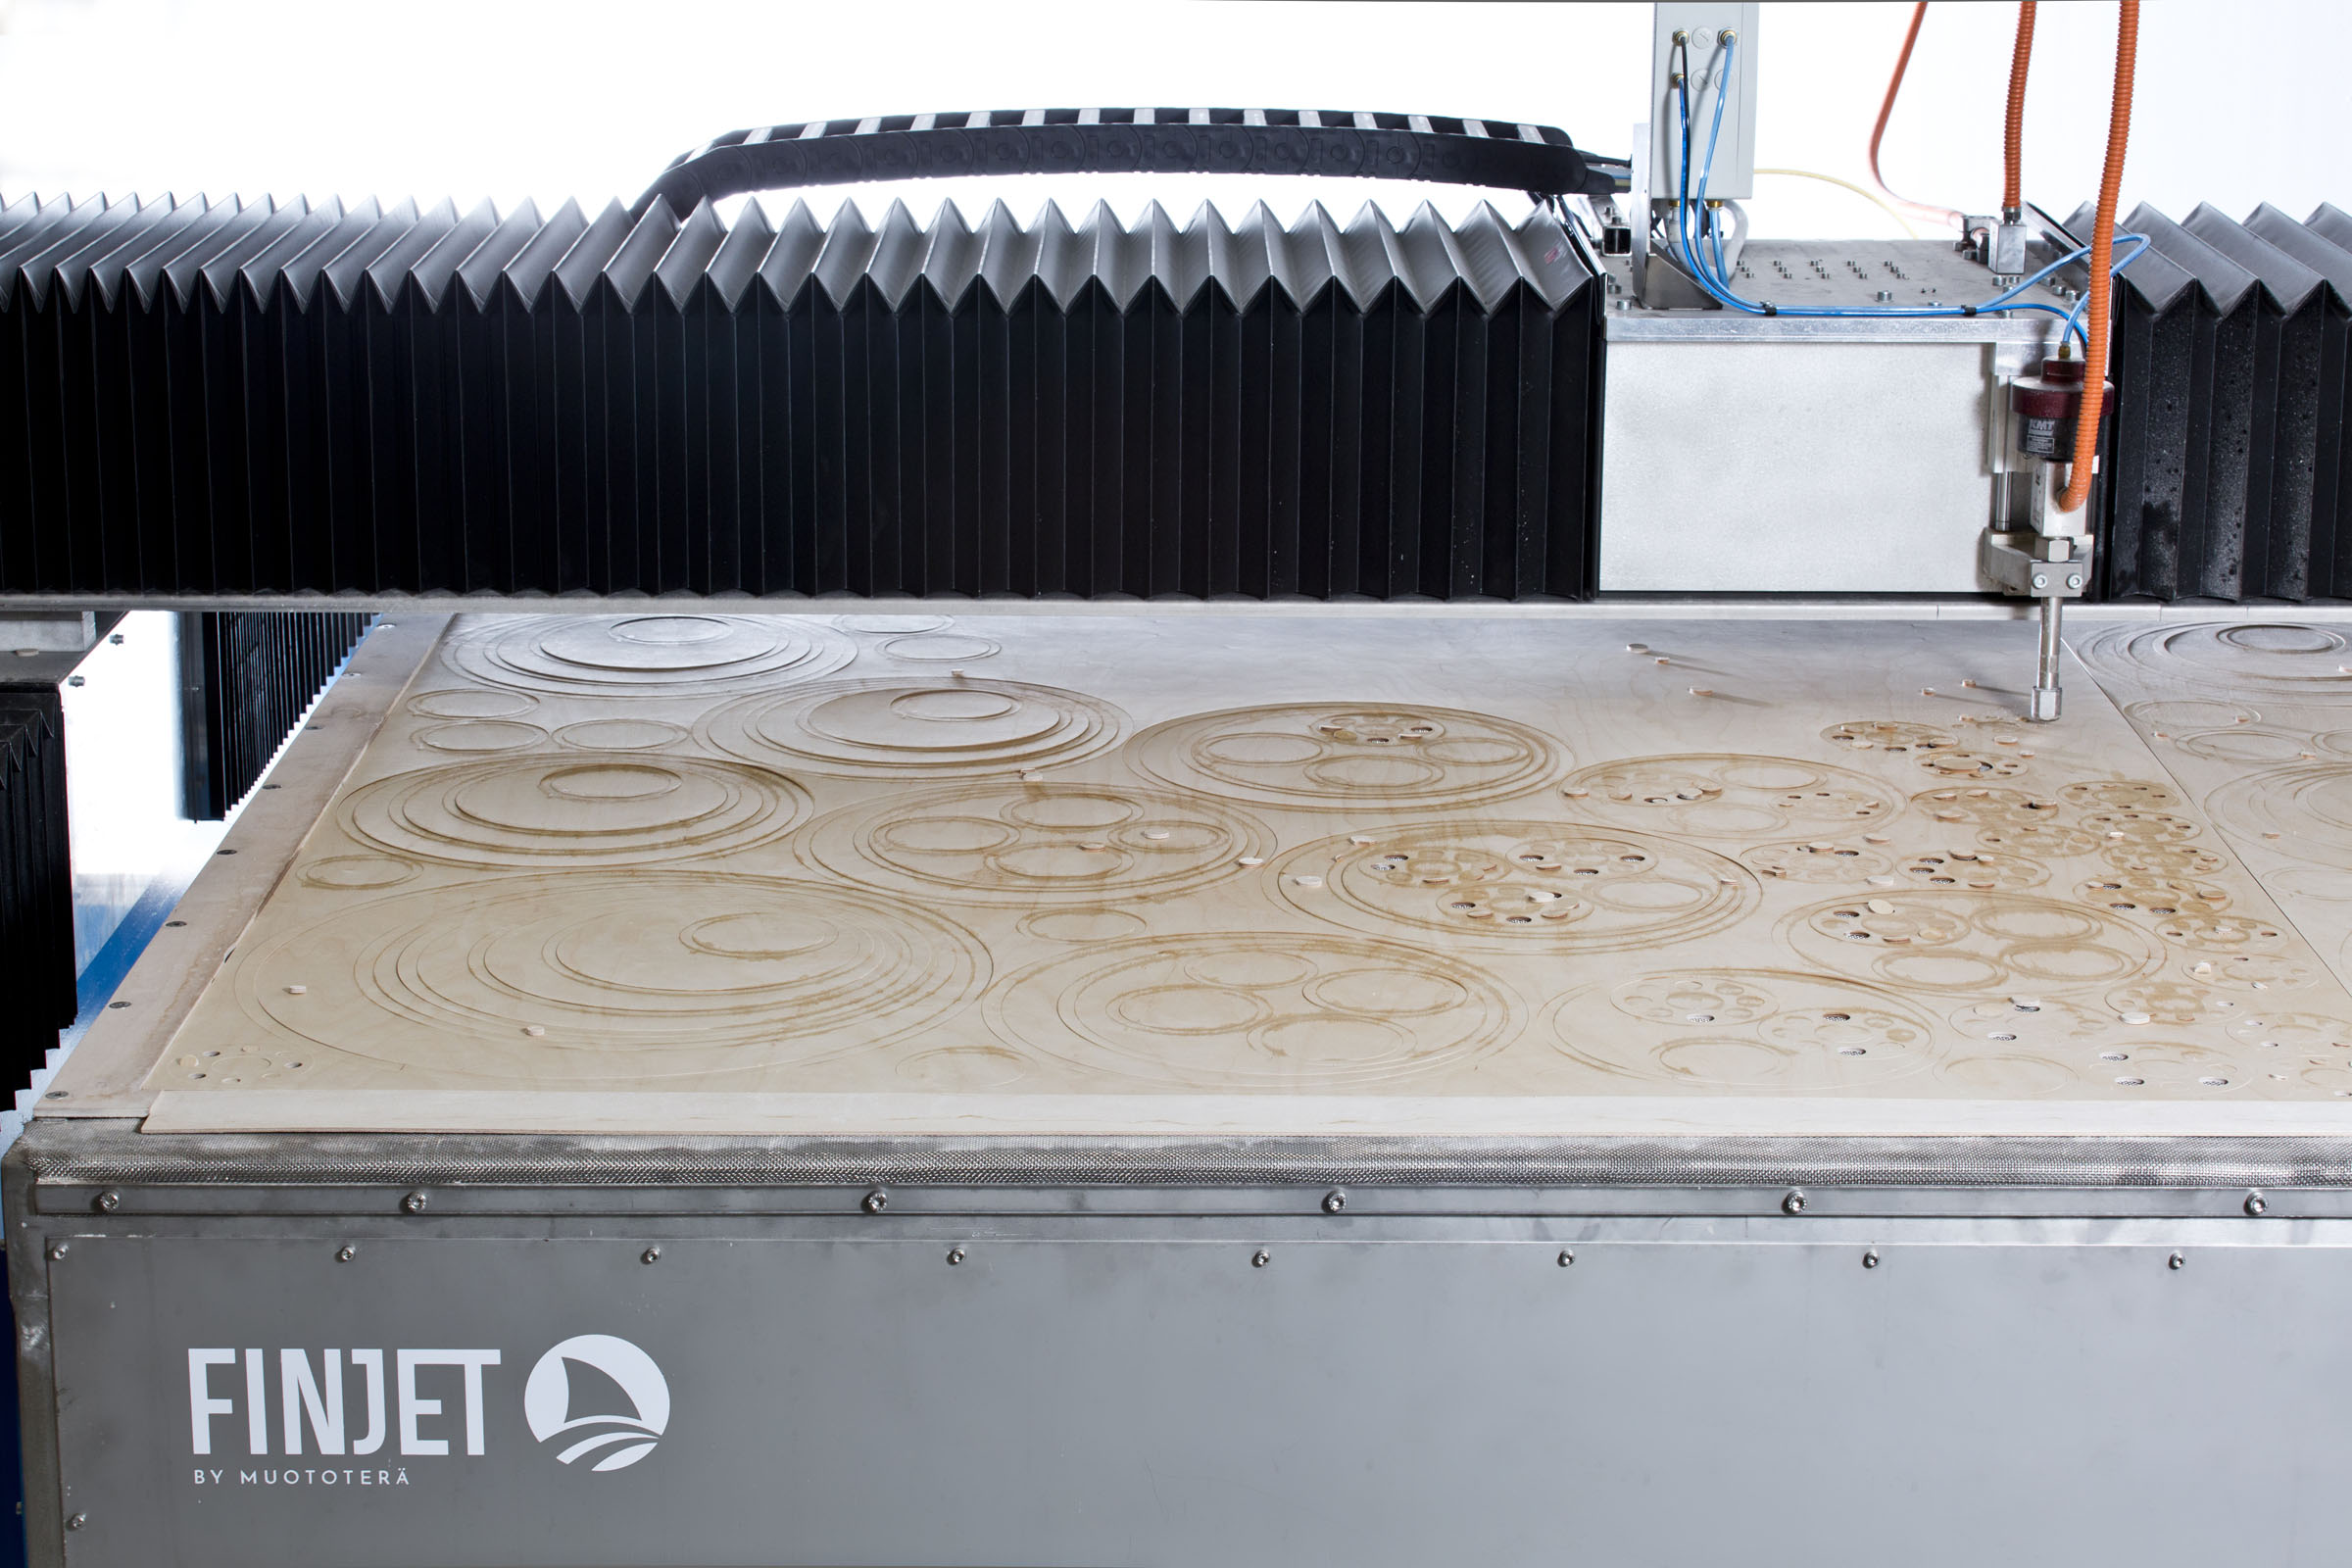 A waterjet cutting machine cutting rings out of a wooden board.